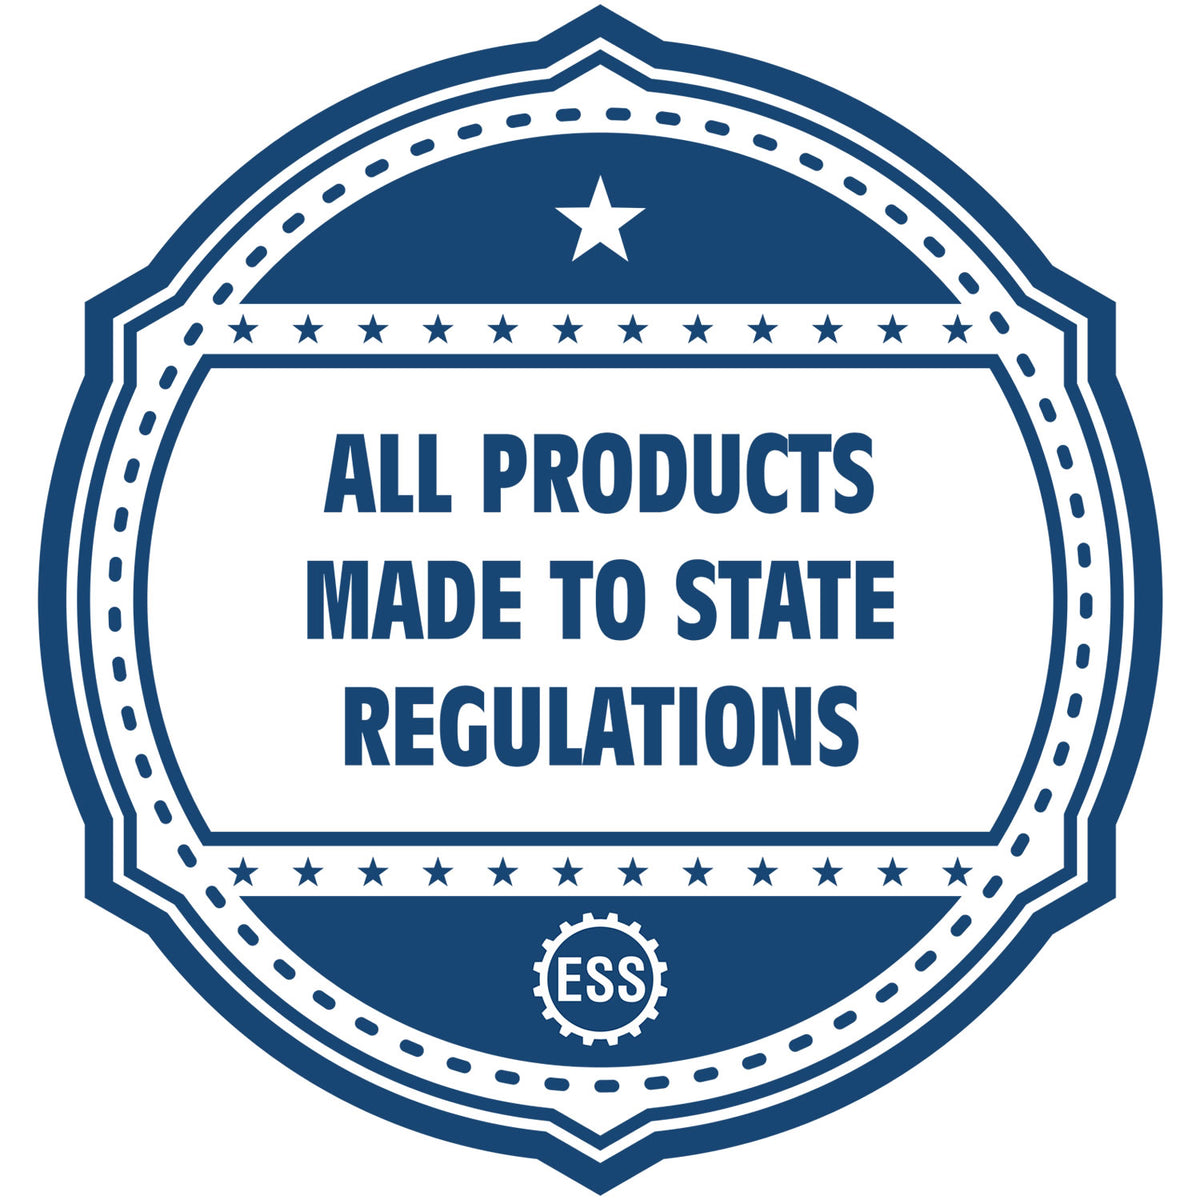 An icon or badge element for the Handheld Florida Architect Seal Embosser showing that this product is made in compliance with state regulations.